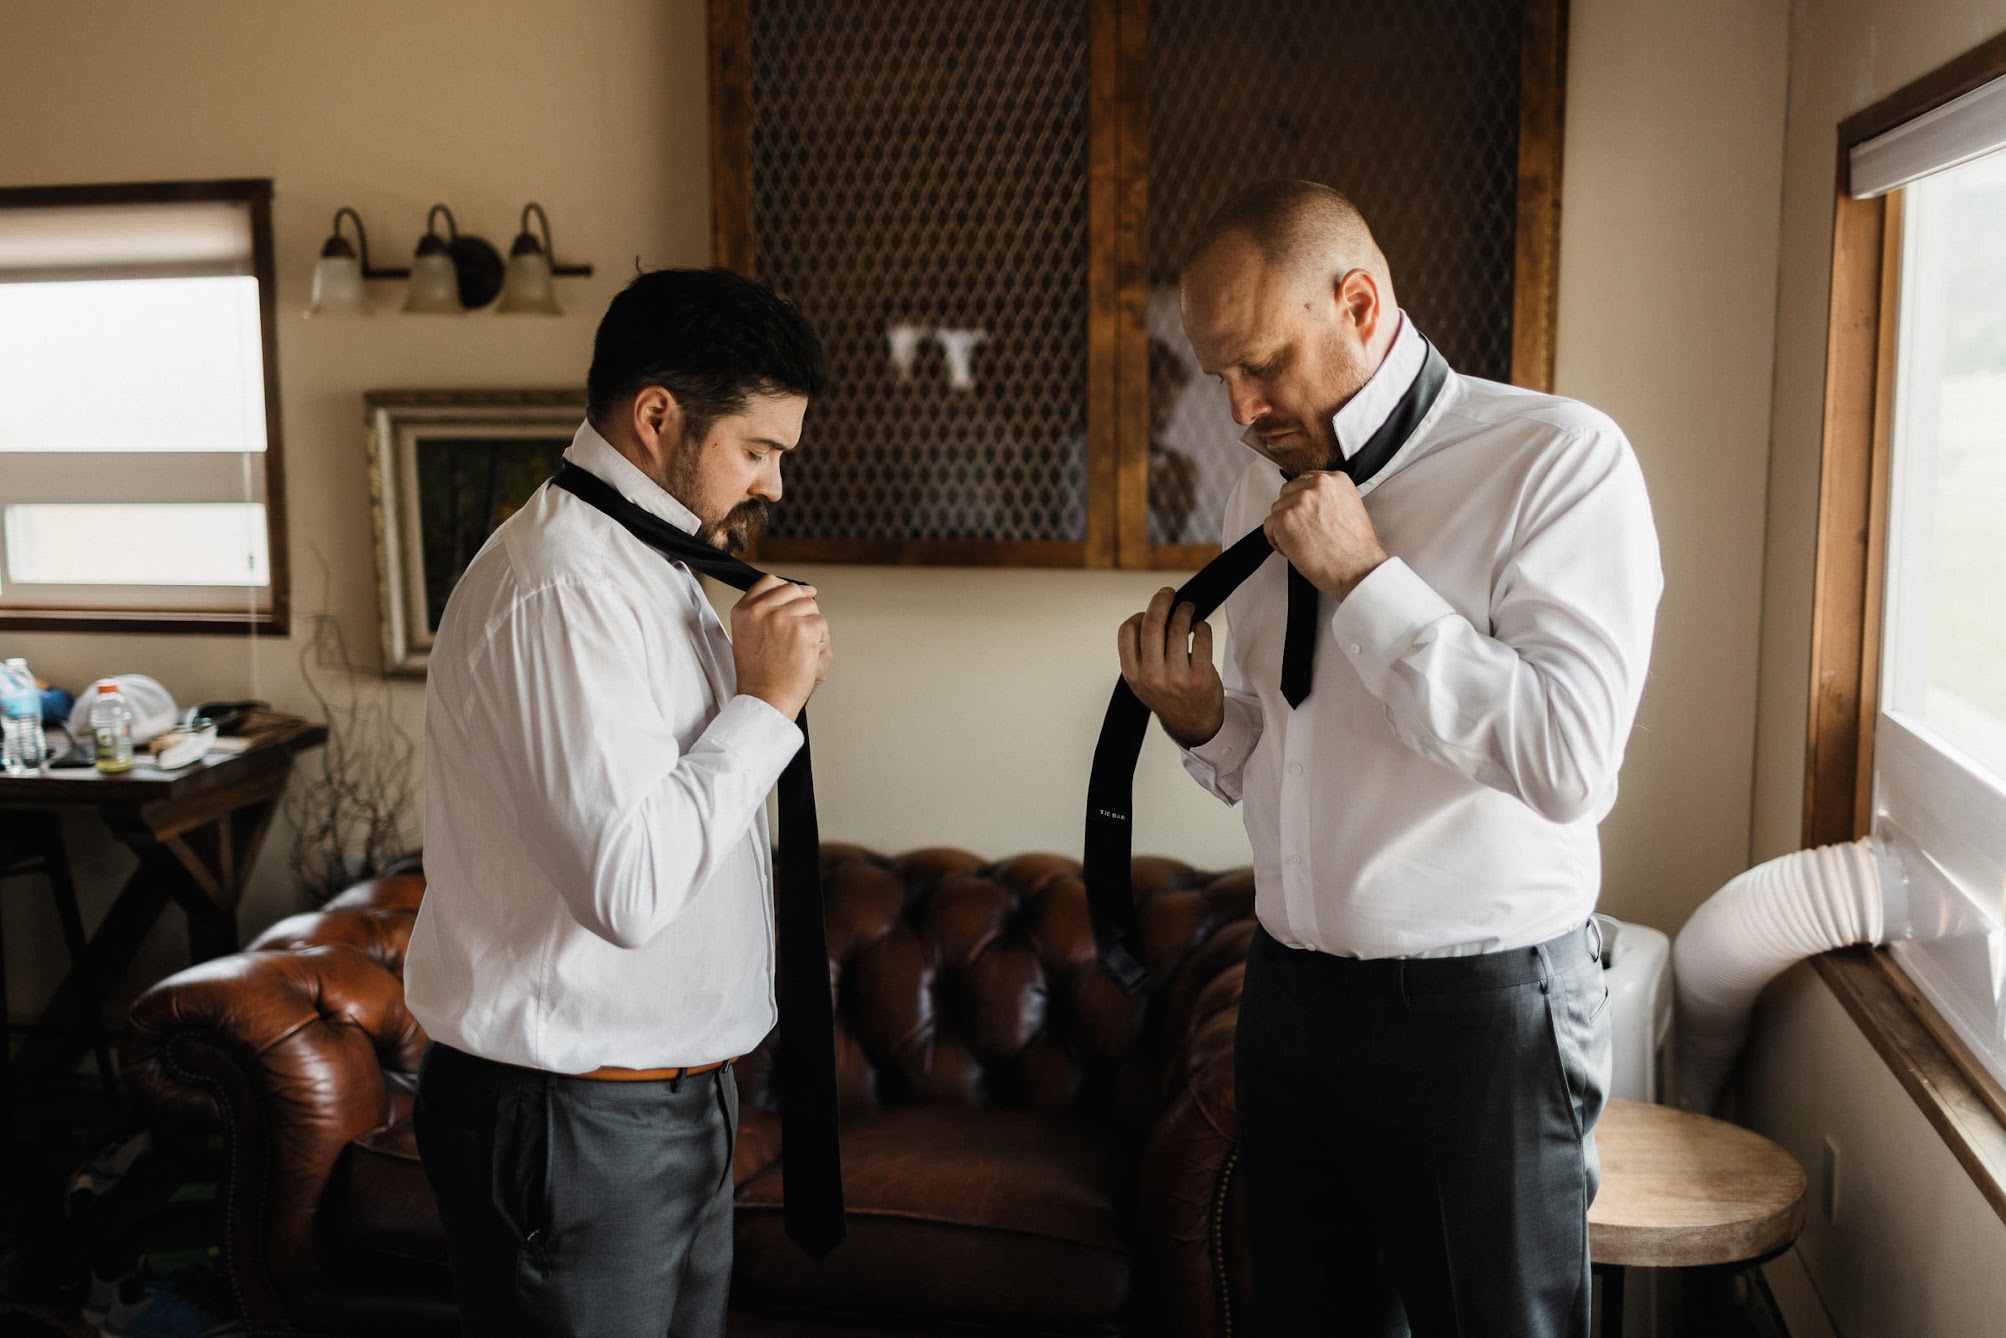 Groom and his best man putting their ties on